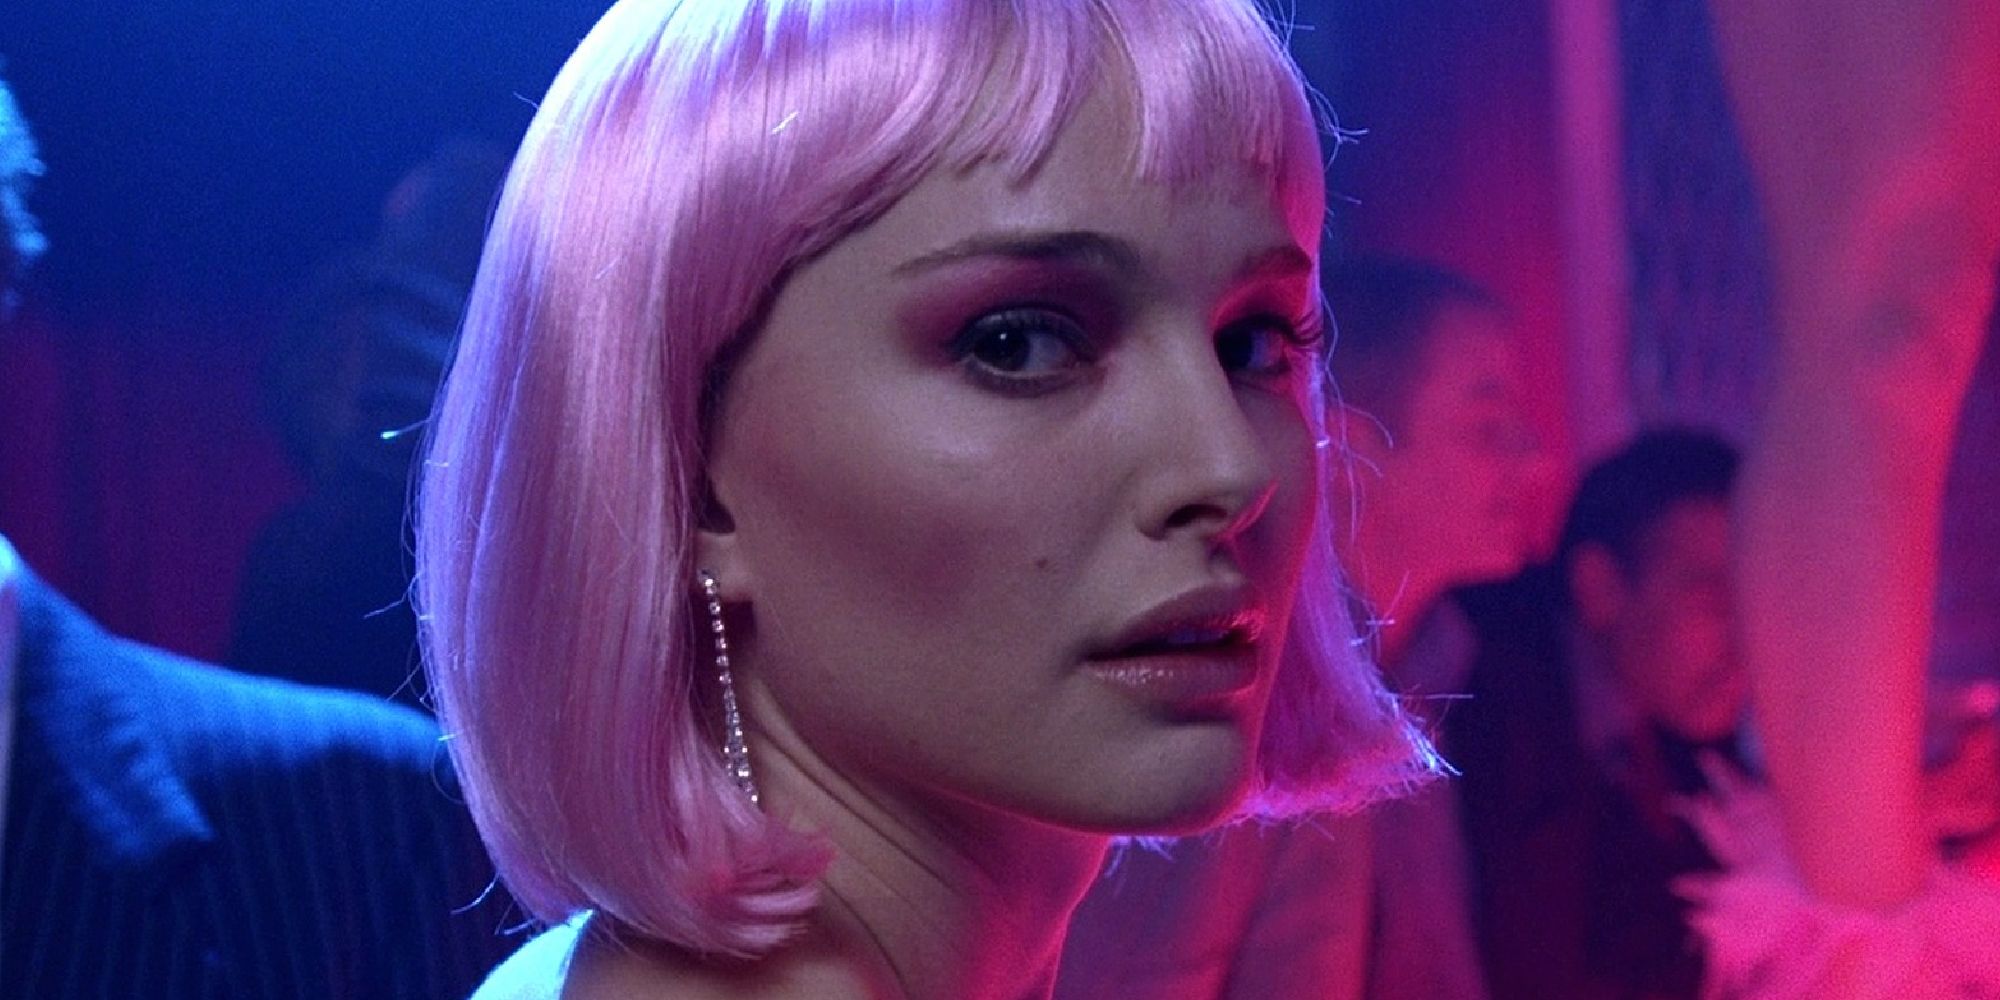 A close-up shot of Natalie Portman with a pink wig in Closer